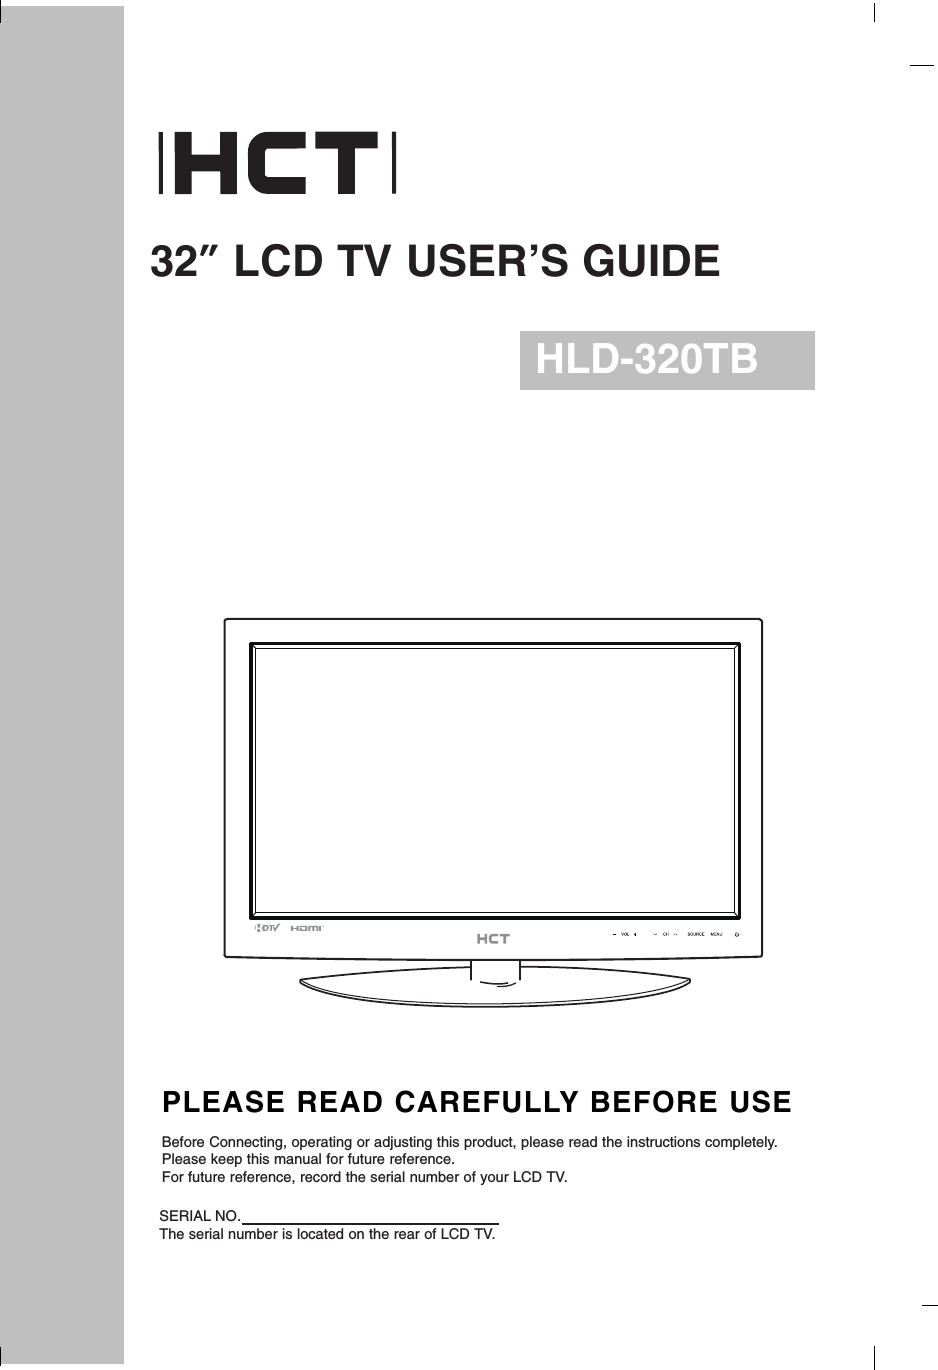 32”LCD TV USER’S GUIDEHLD-320TBPLEASE READ CAREFULLY BEFORE USEBefore Connecting, operating or adjusting this product, please read the instructions completely.Please keep this manual for future reference.For future reference, record the serial number of your LCD TV.SERIAL NO.The serial number is located on the rear of LCD TV.